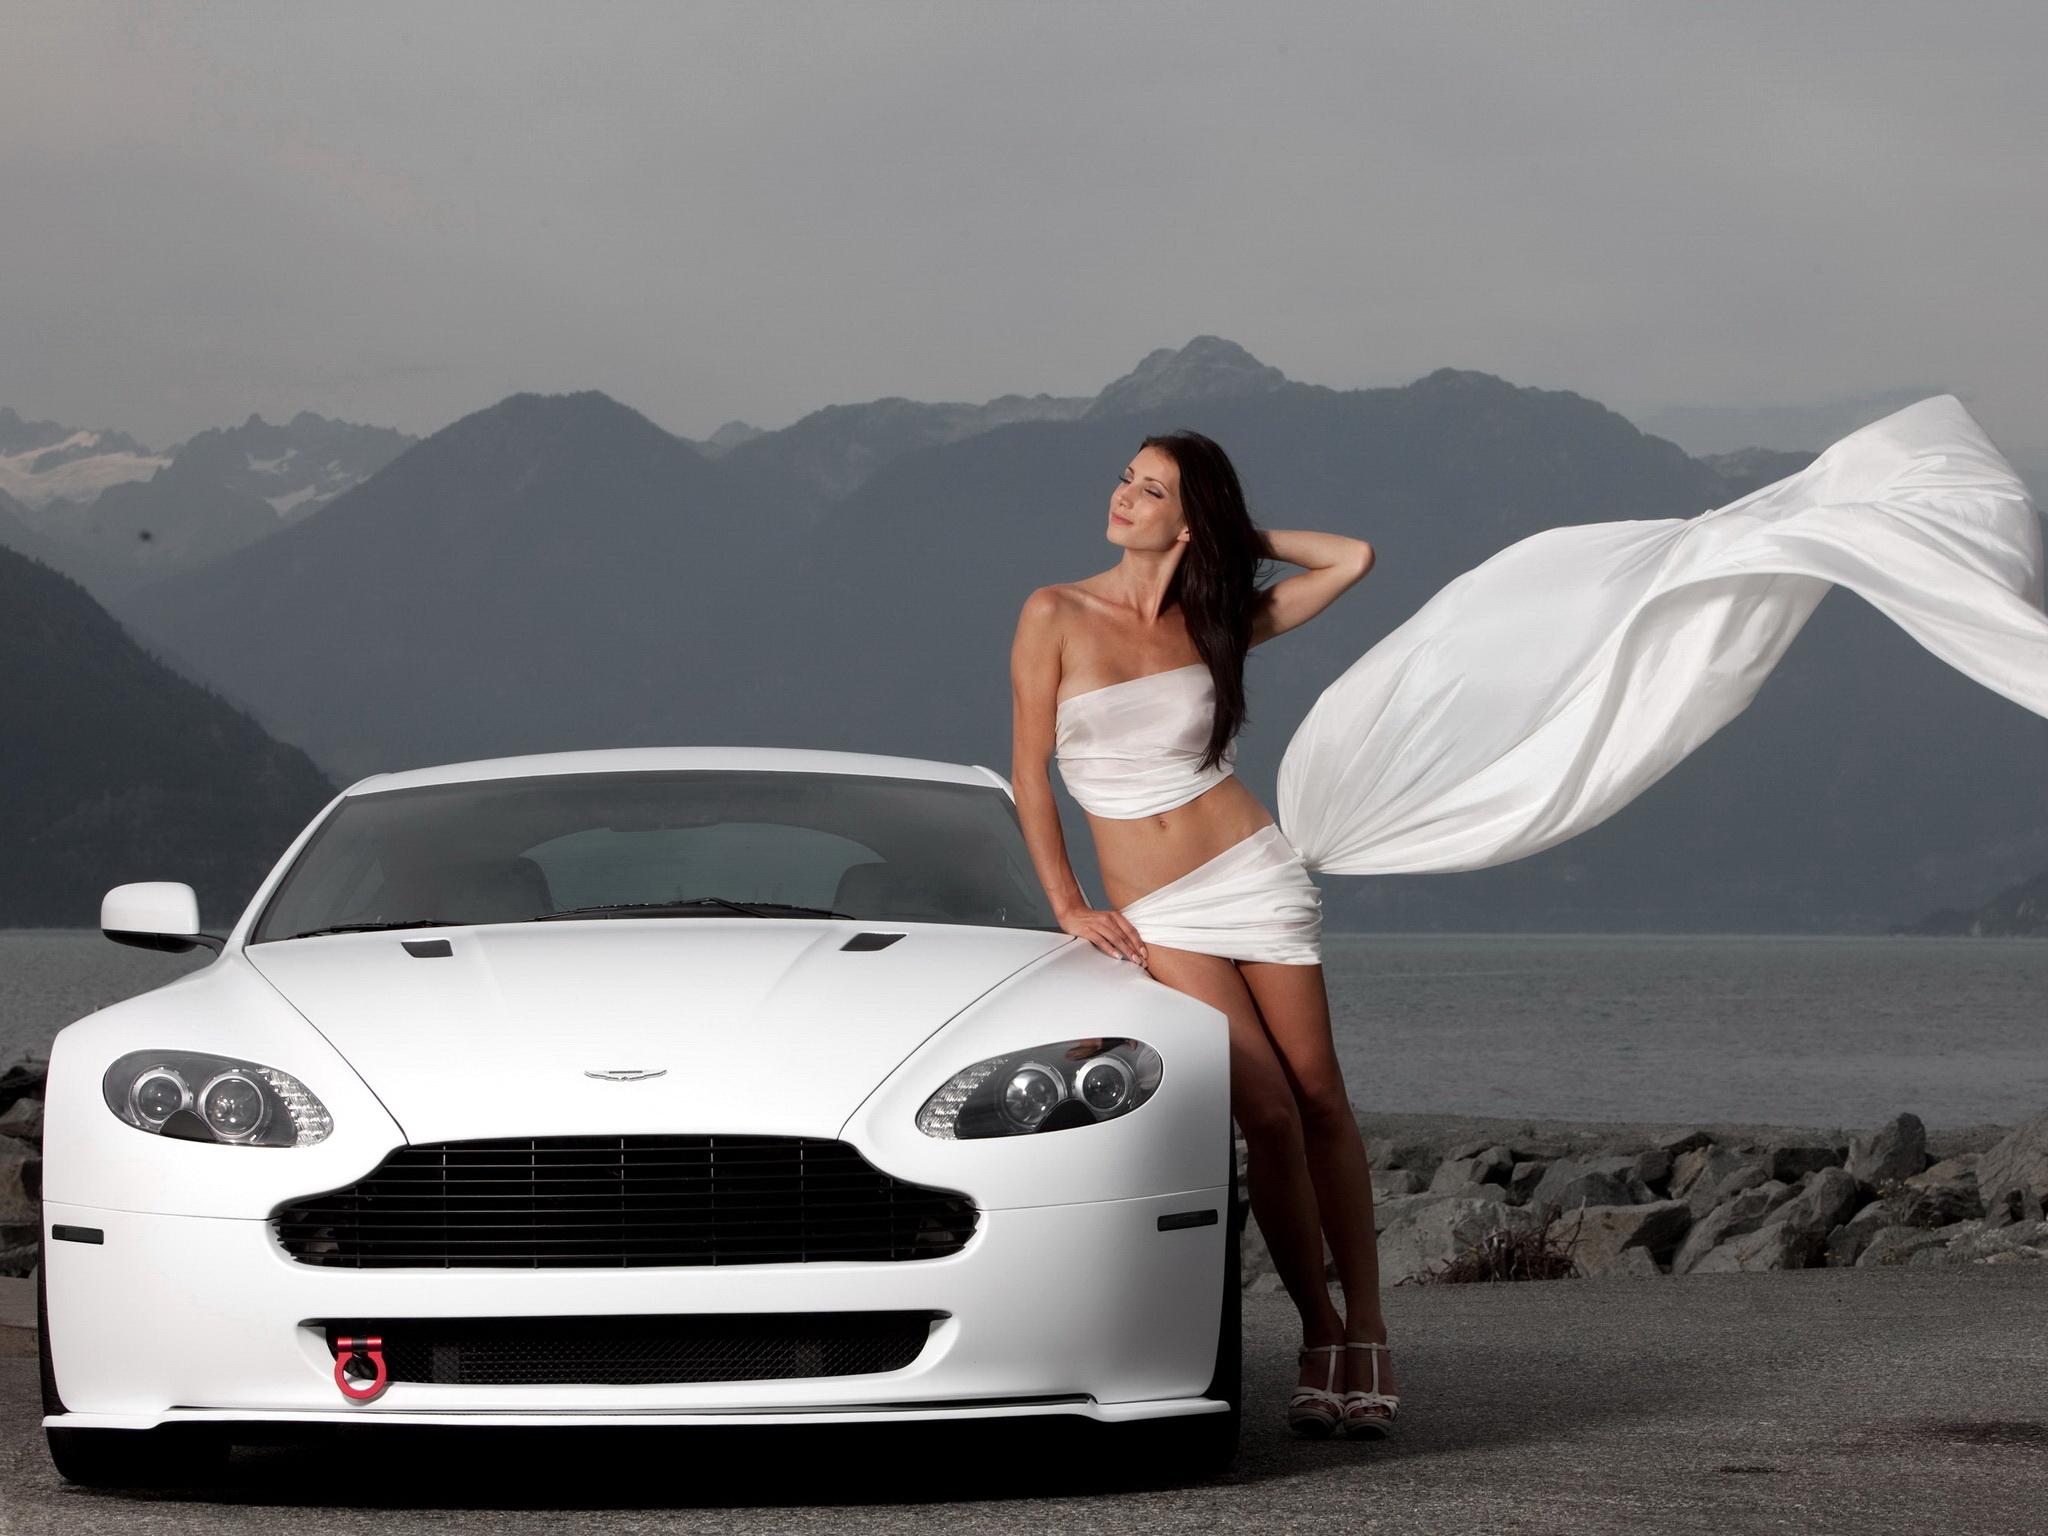 Download full size Girls & Cars wallpaper / People / 2048x1536